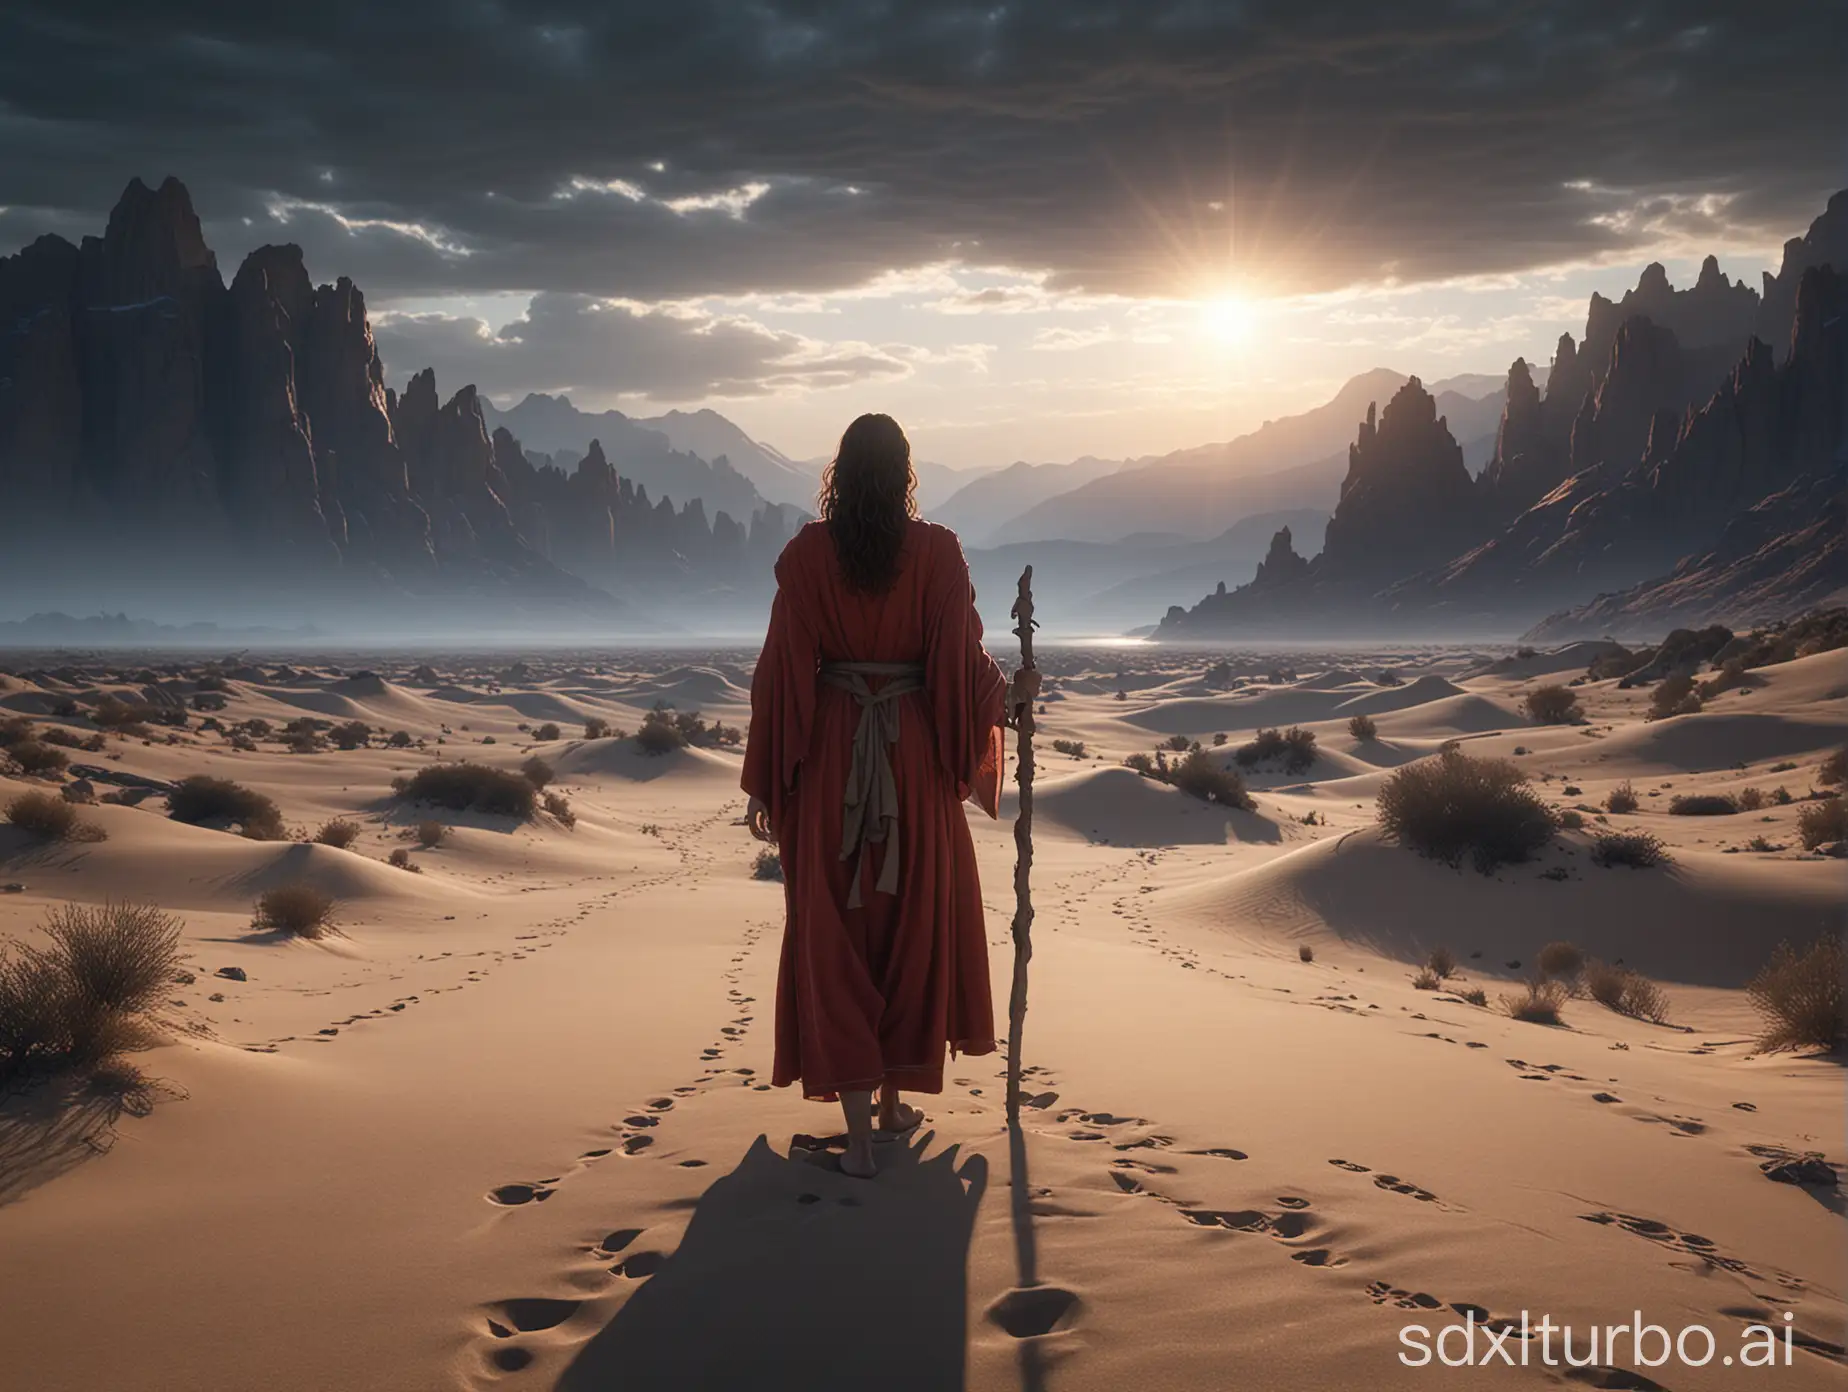 and from heaven an angel called Hagar, A lone figure stands on a sandy plain, gazing towards distant mountains under a dramatic sky. The person is draped in a long robe and carries a staff, suggesting a journey or pilgrimage. The sun casts an ethereal glow over the landscape, hinting at either dawn or dusk.  Cinematic lighting, Unreal Engine 5, Cinematic, Color Grading, Editorial Photography, Photography, Photoshoot, Shot on 70mm lense, Depth of Field, DOF, Tilt Blur, Shutter Speed 1/1000, F/22, White Balance, 32k, Super-Resolution, Megapixel, ProPhoto RGB, VR, tall, epic, artgerm, alex ross, Halfrear Lighting, Backlight, Natural Lighting, Incandescent, Optical Fiber, Moody Lighting, Cinematic Lighting, Studio Lighting, Soft Lighting, Volumetric, Contre-Jour, dark Lighting, Accent Lighting, Global Illumination, Screen Space Global Illumination, Ray Tracing Global Illumination, blue Rim light, cool color grading 45%,